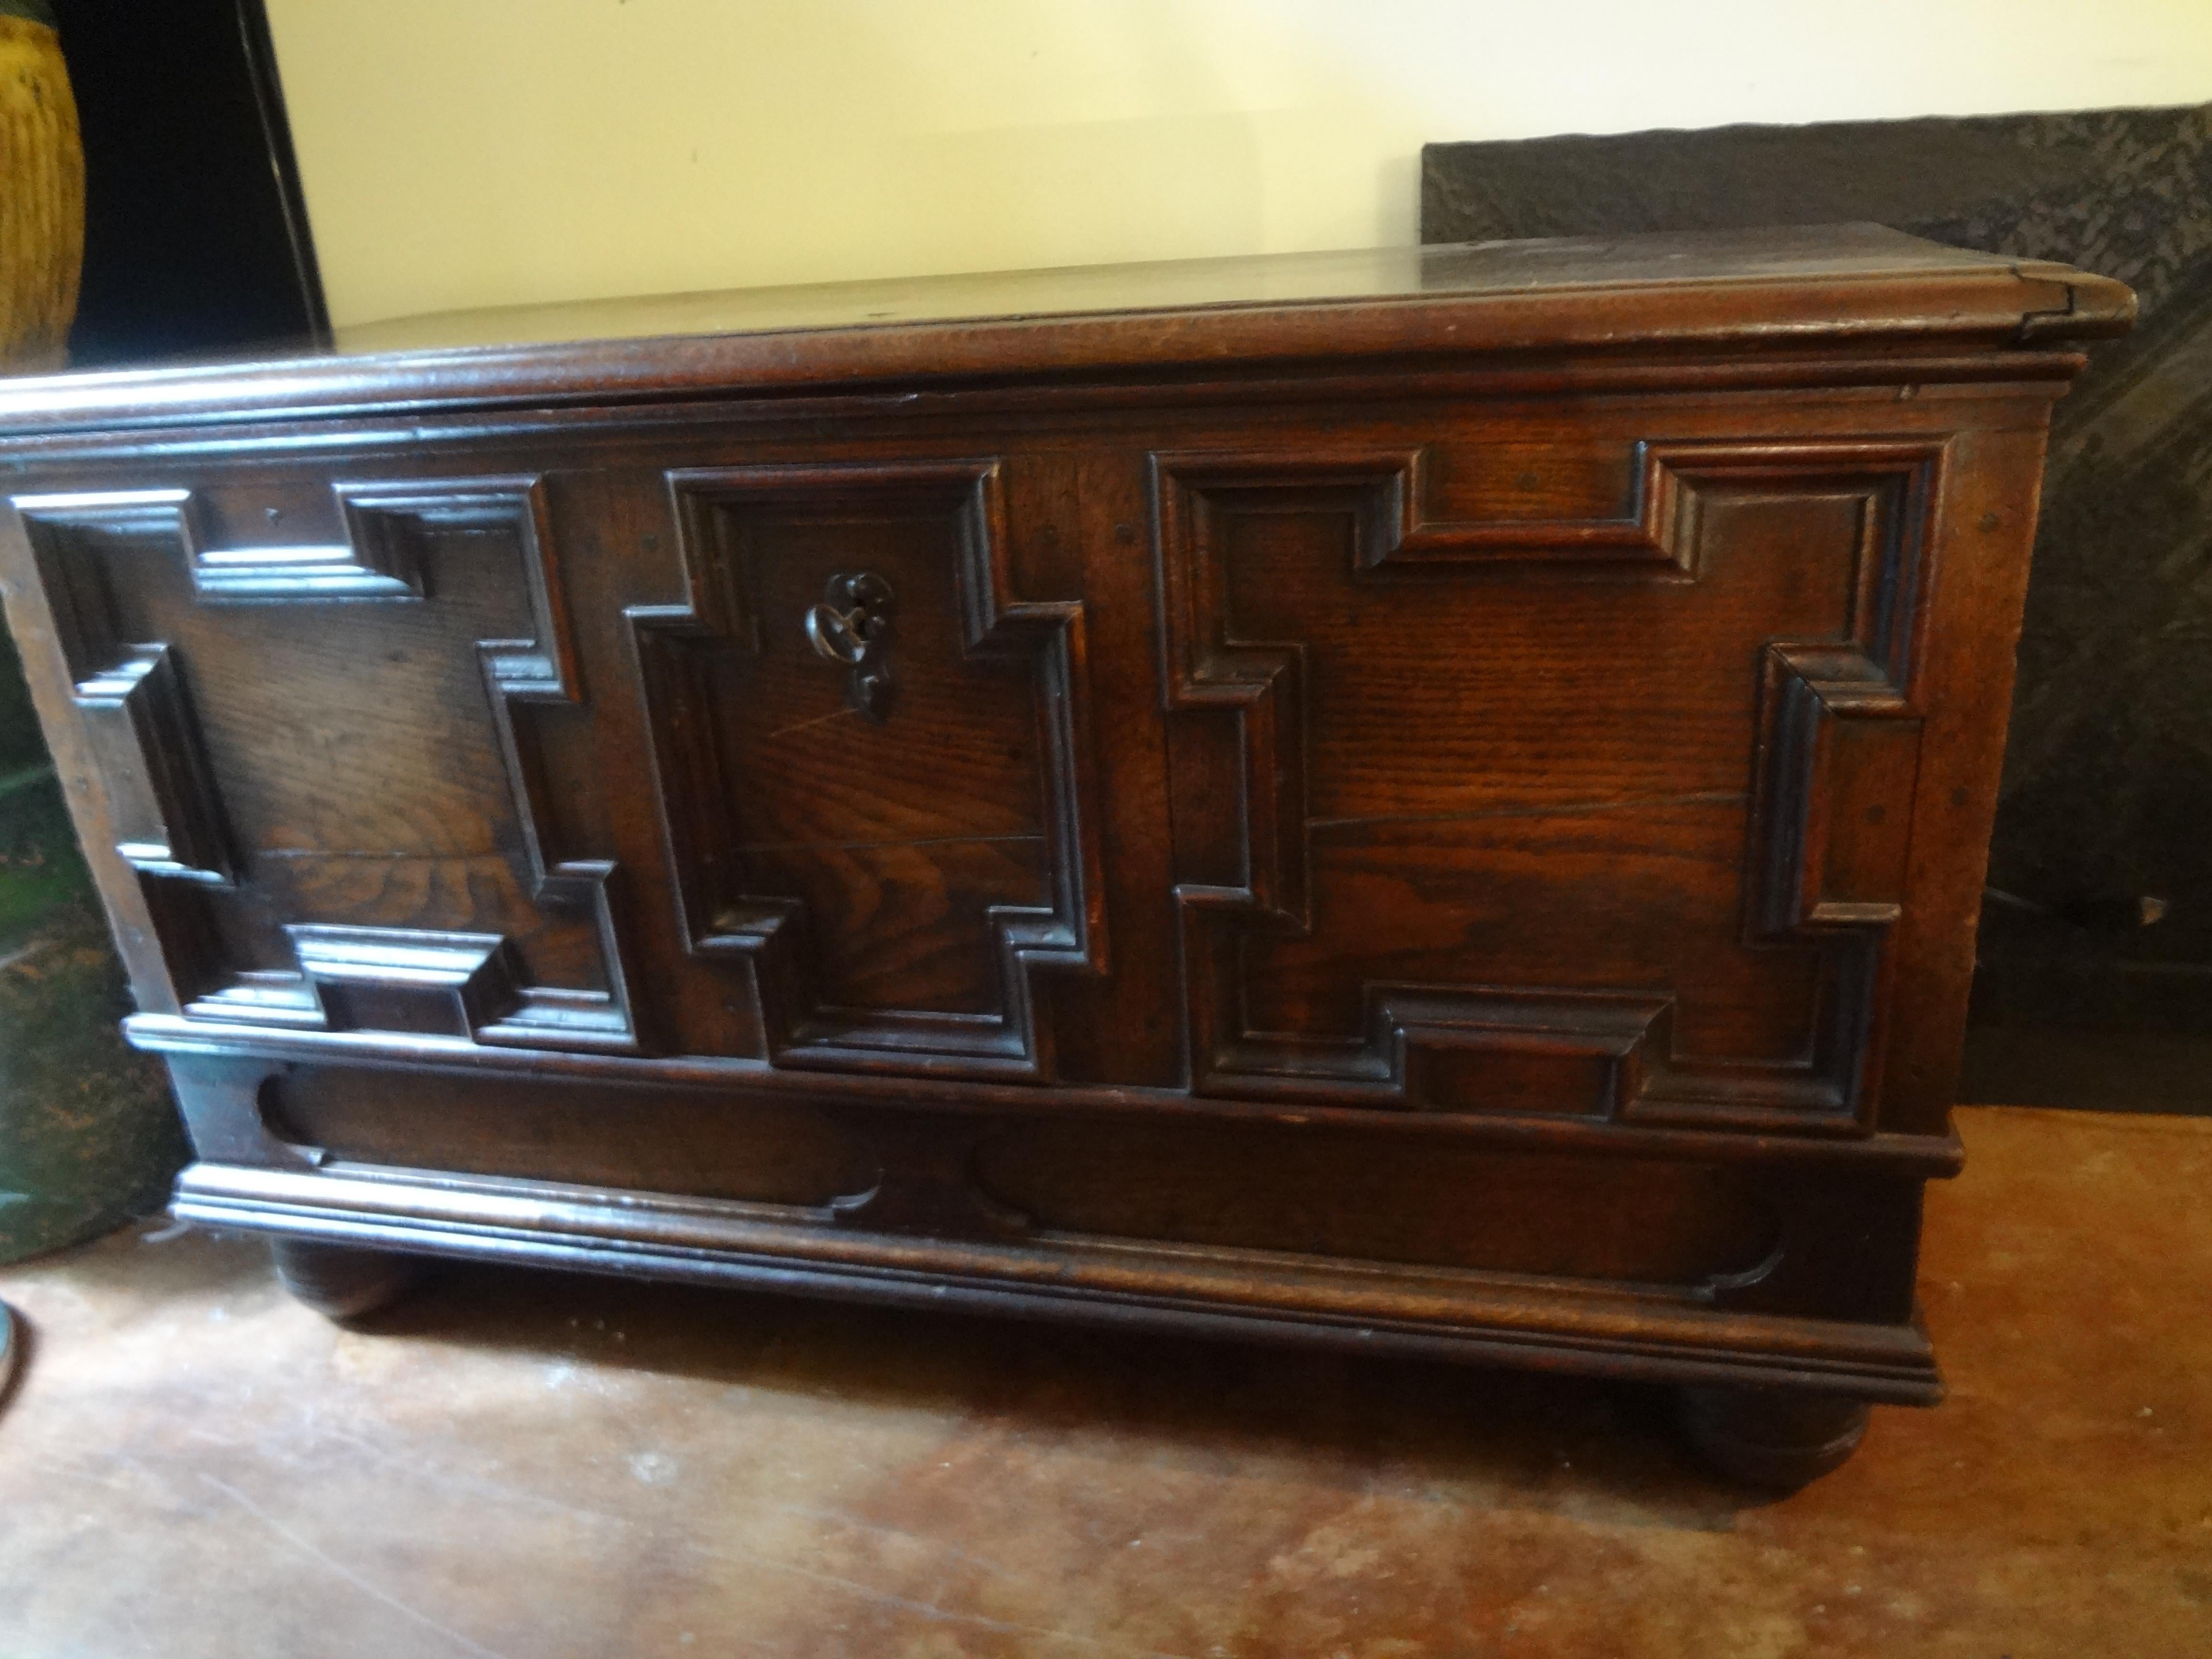 18th century French Louis XVI walnut coffer or blanket chest.
18th century French Louis XVI or Gothic style walnut coffer or chest from Dijon.
This gorgeous coffer, trunk or blanket chest has a beautiful triple panel front, hinged plank lid and